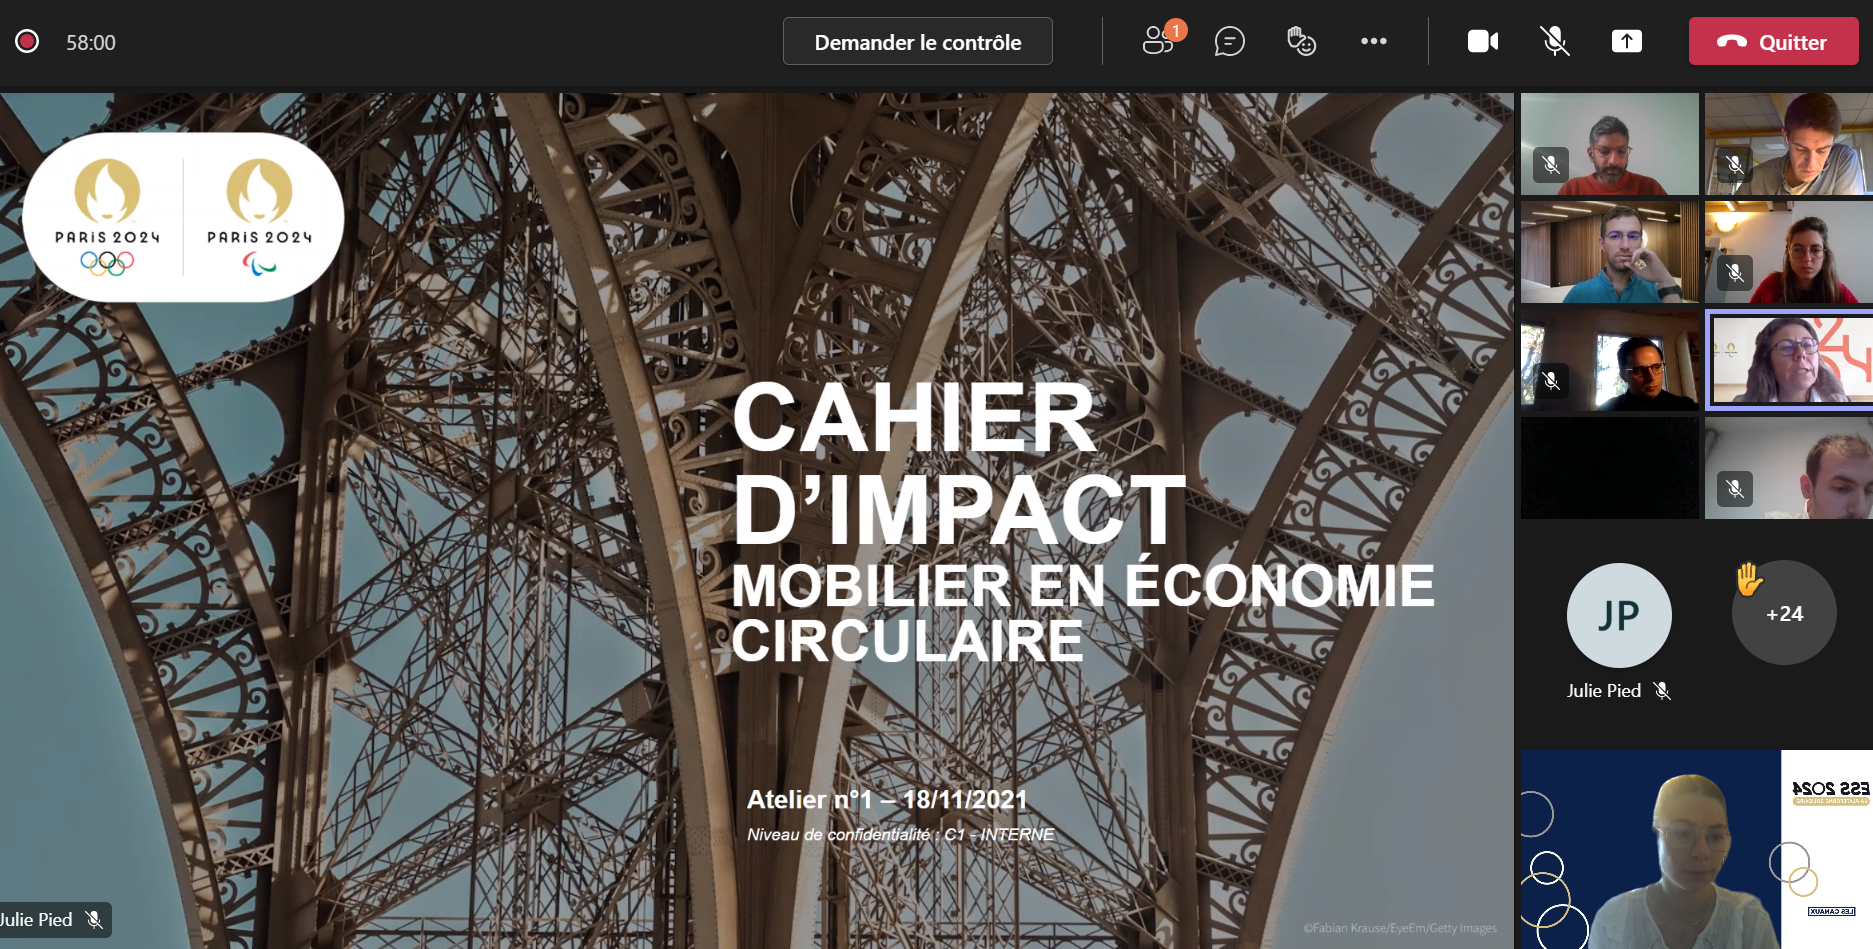 ESS 2024  Cahiers d'Impact